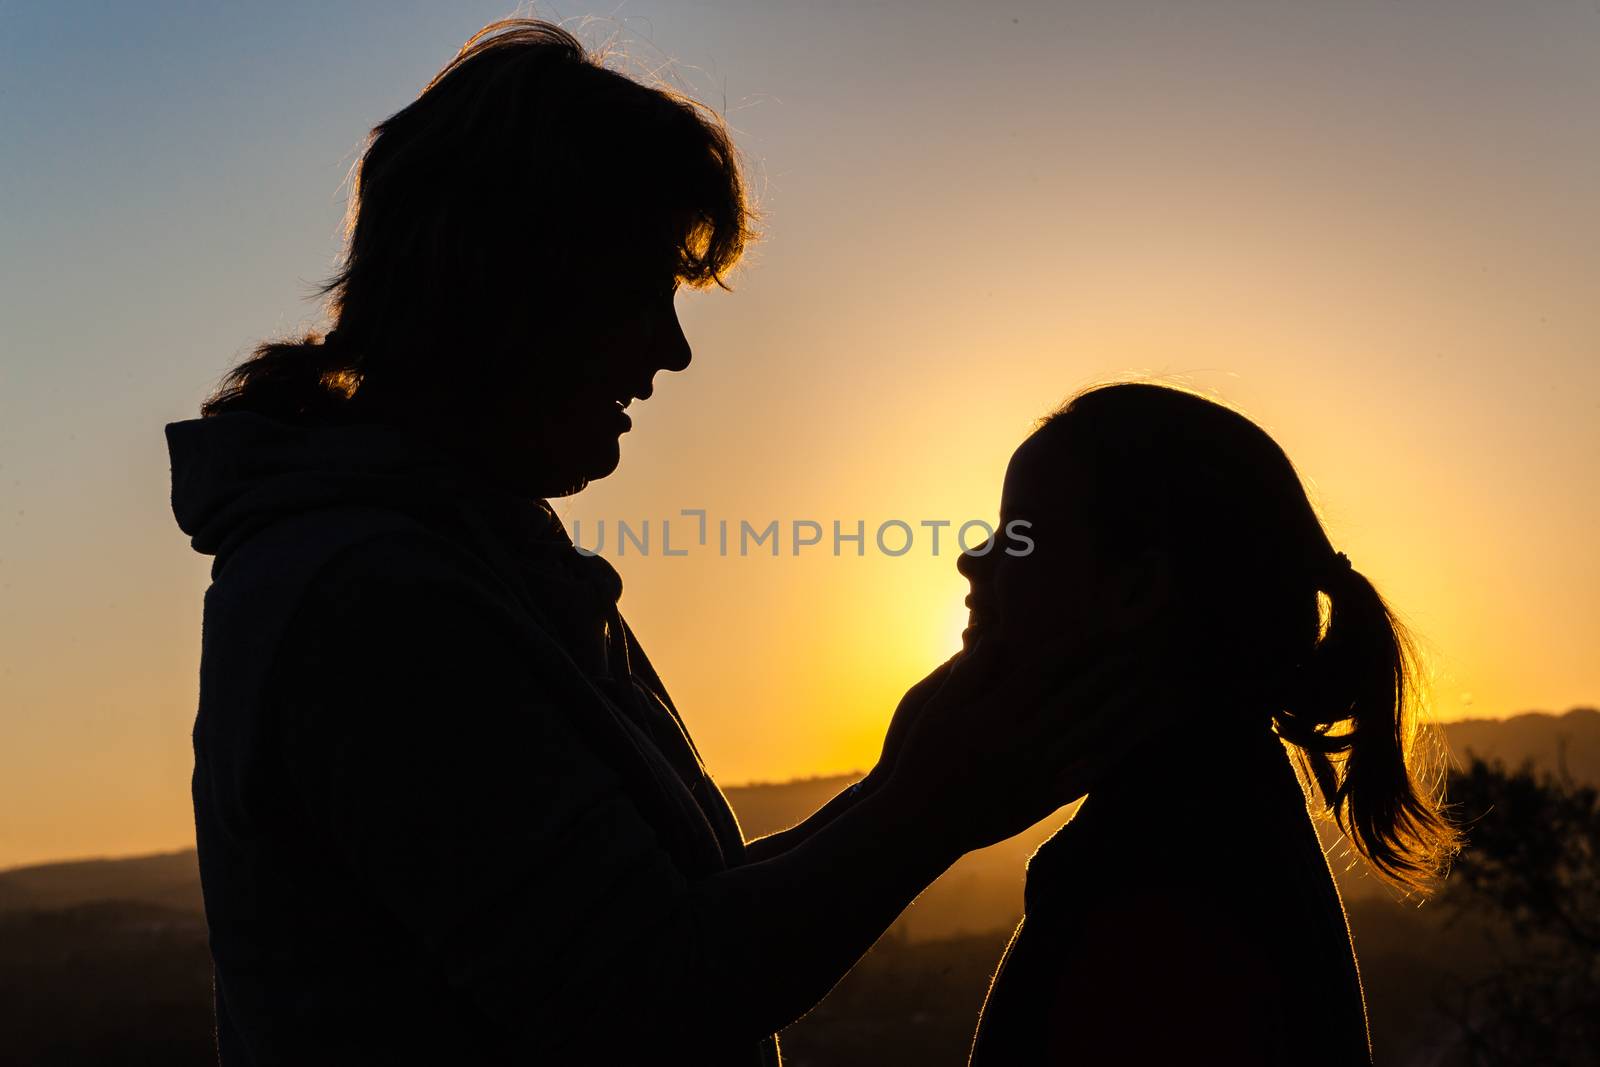 Mother daughter affection caring moments together silhouetted outlines at sunset.